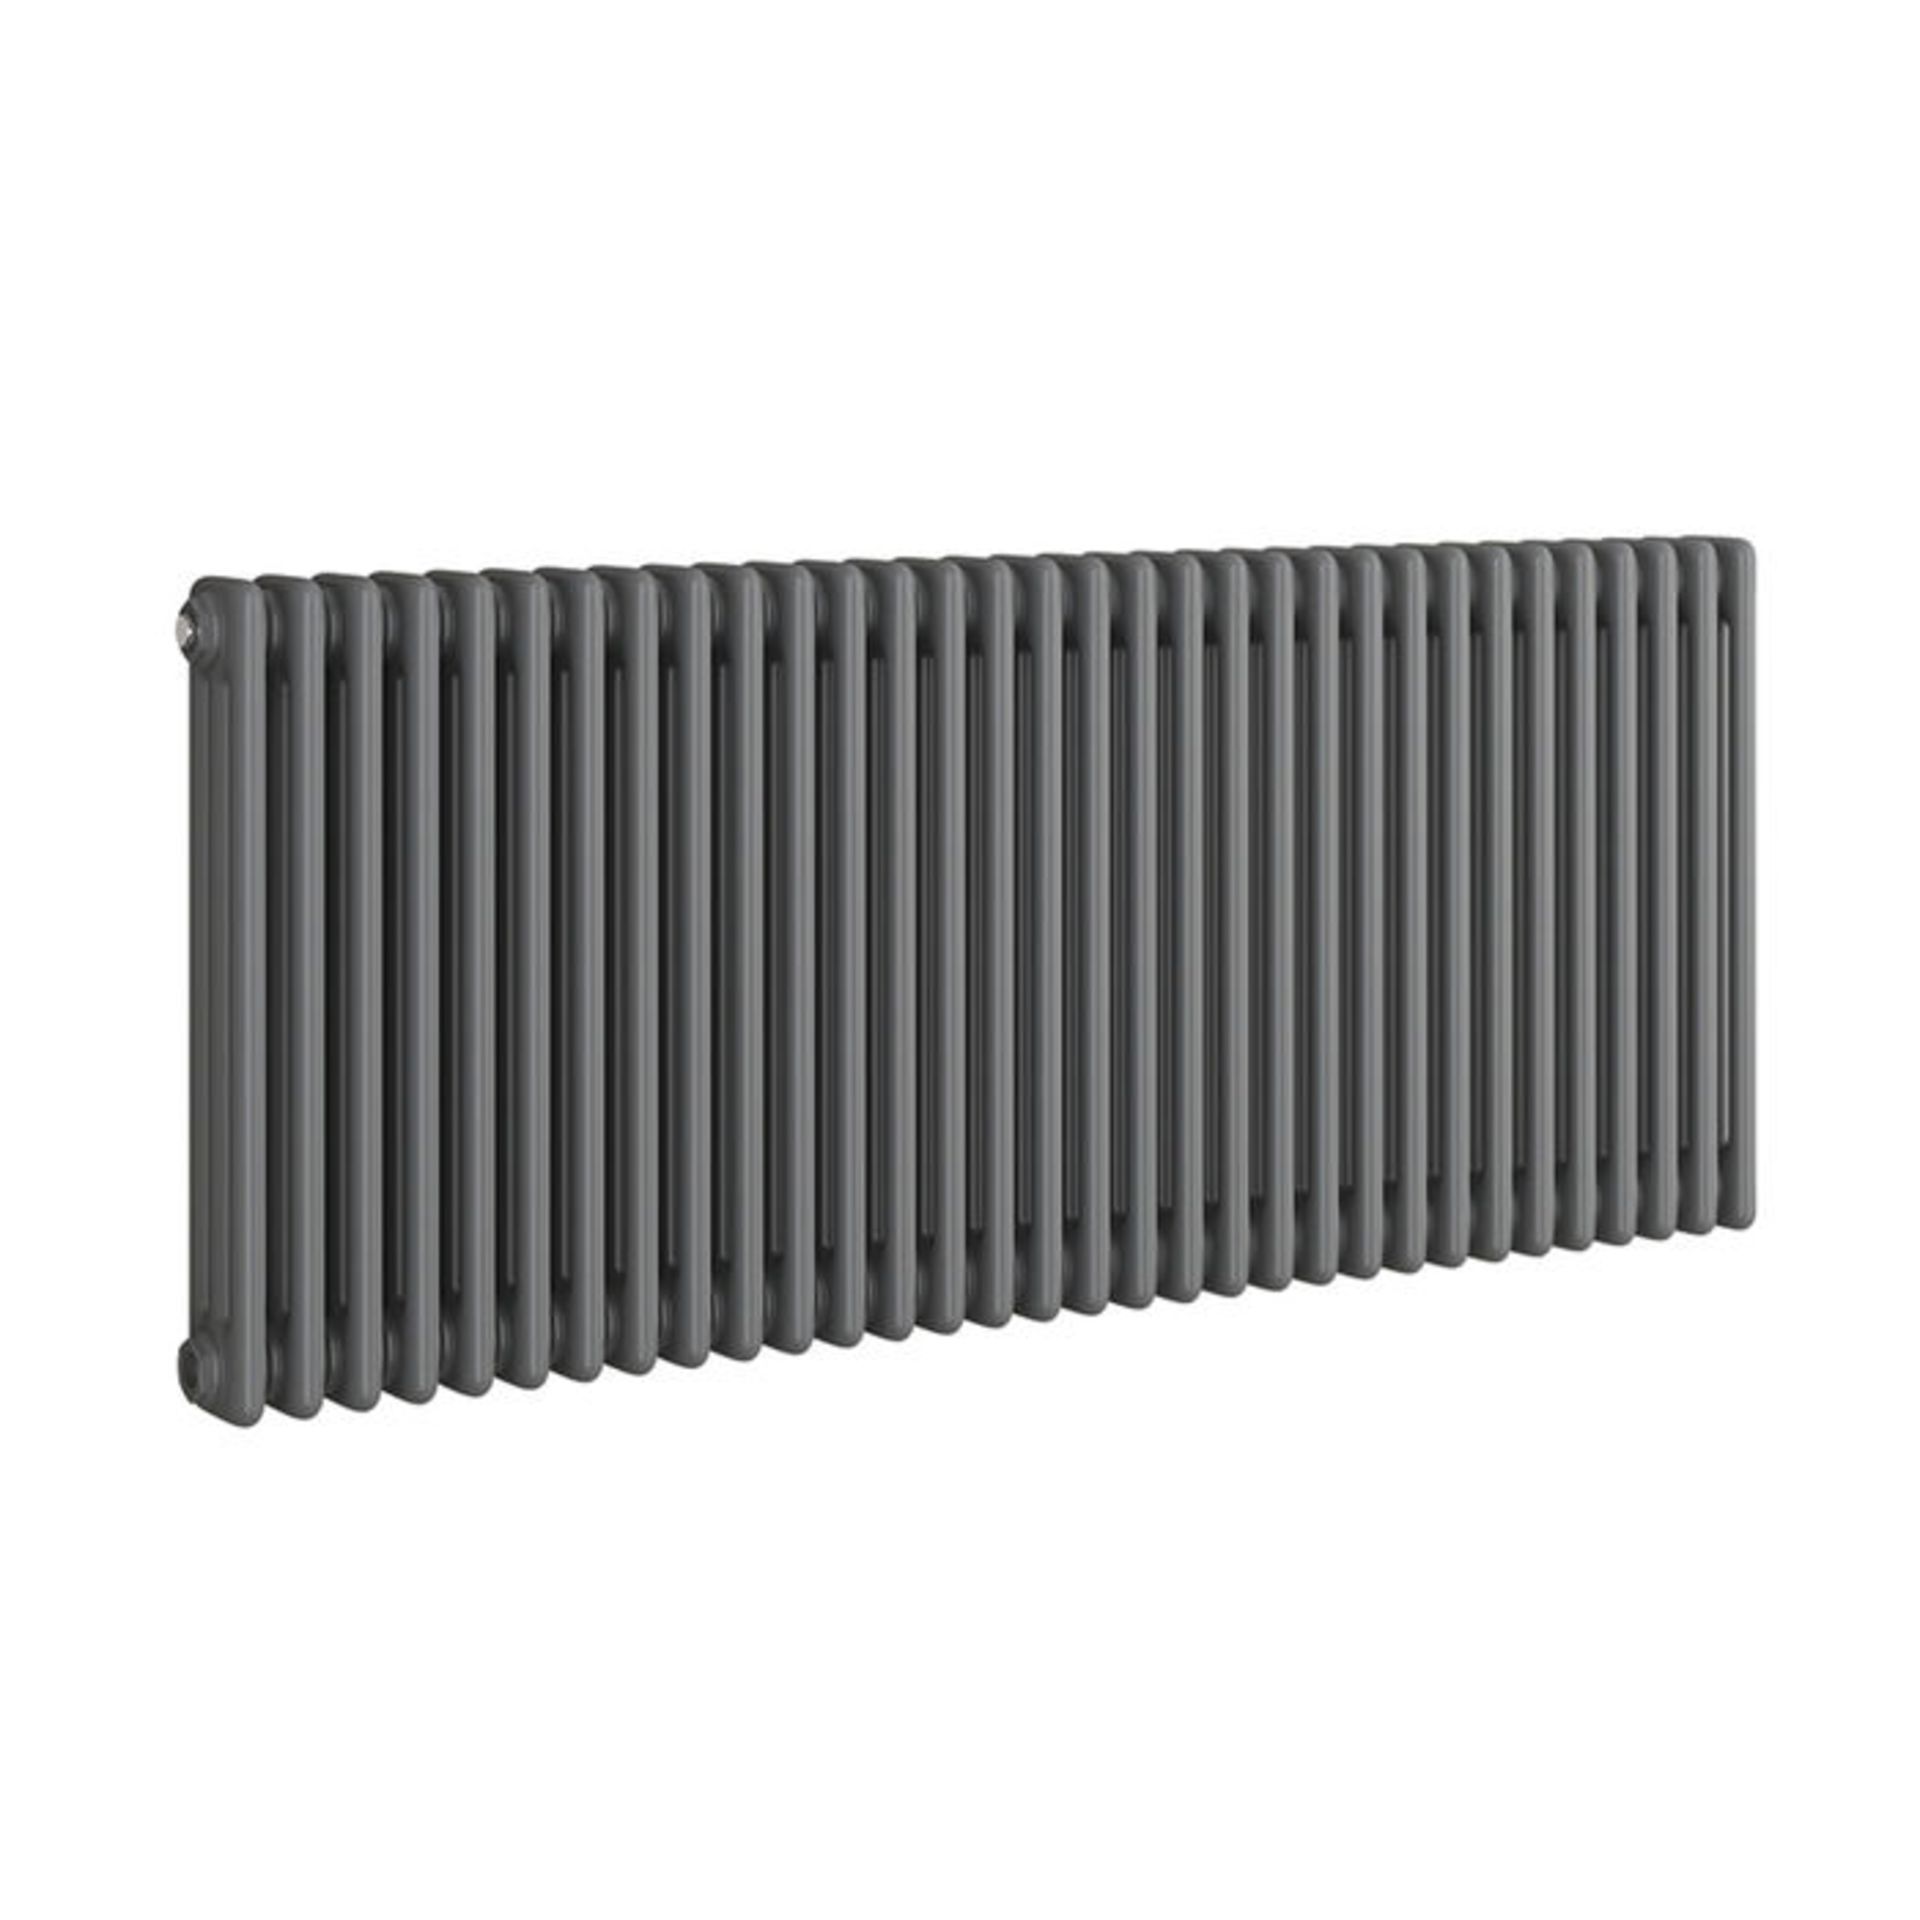 NEW & BOXED 600x1188mm Anthracite Double Panel Horizontal Colosseum Traditional Radiator. RCA565.RRP - Image 3 of 3